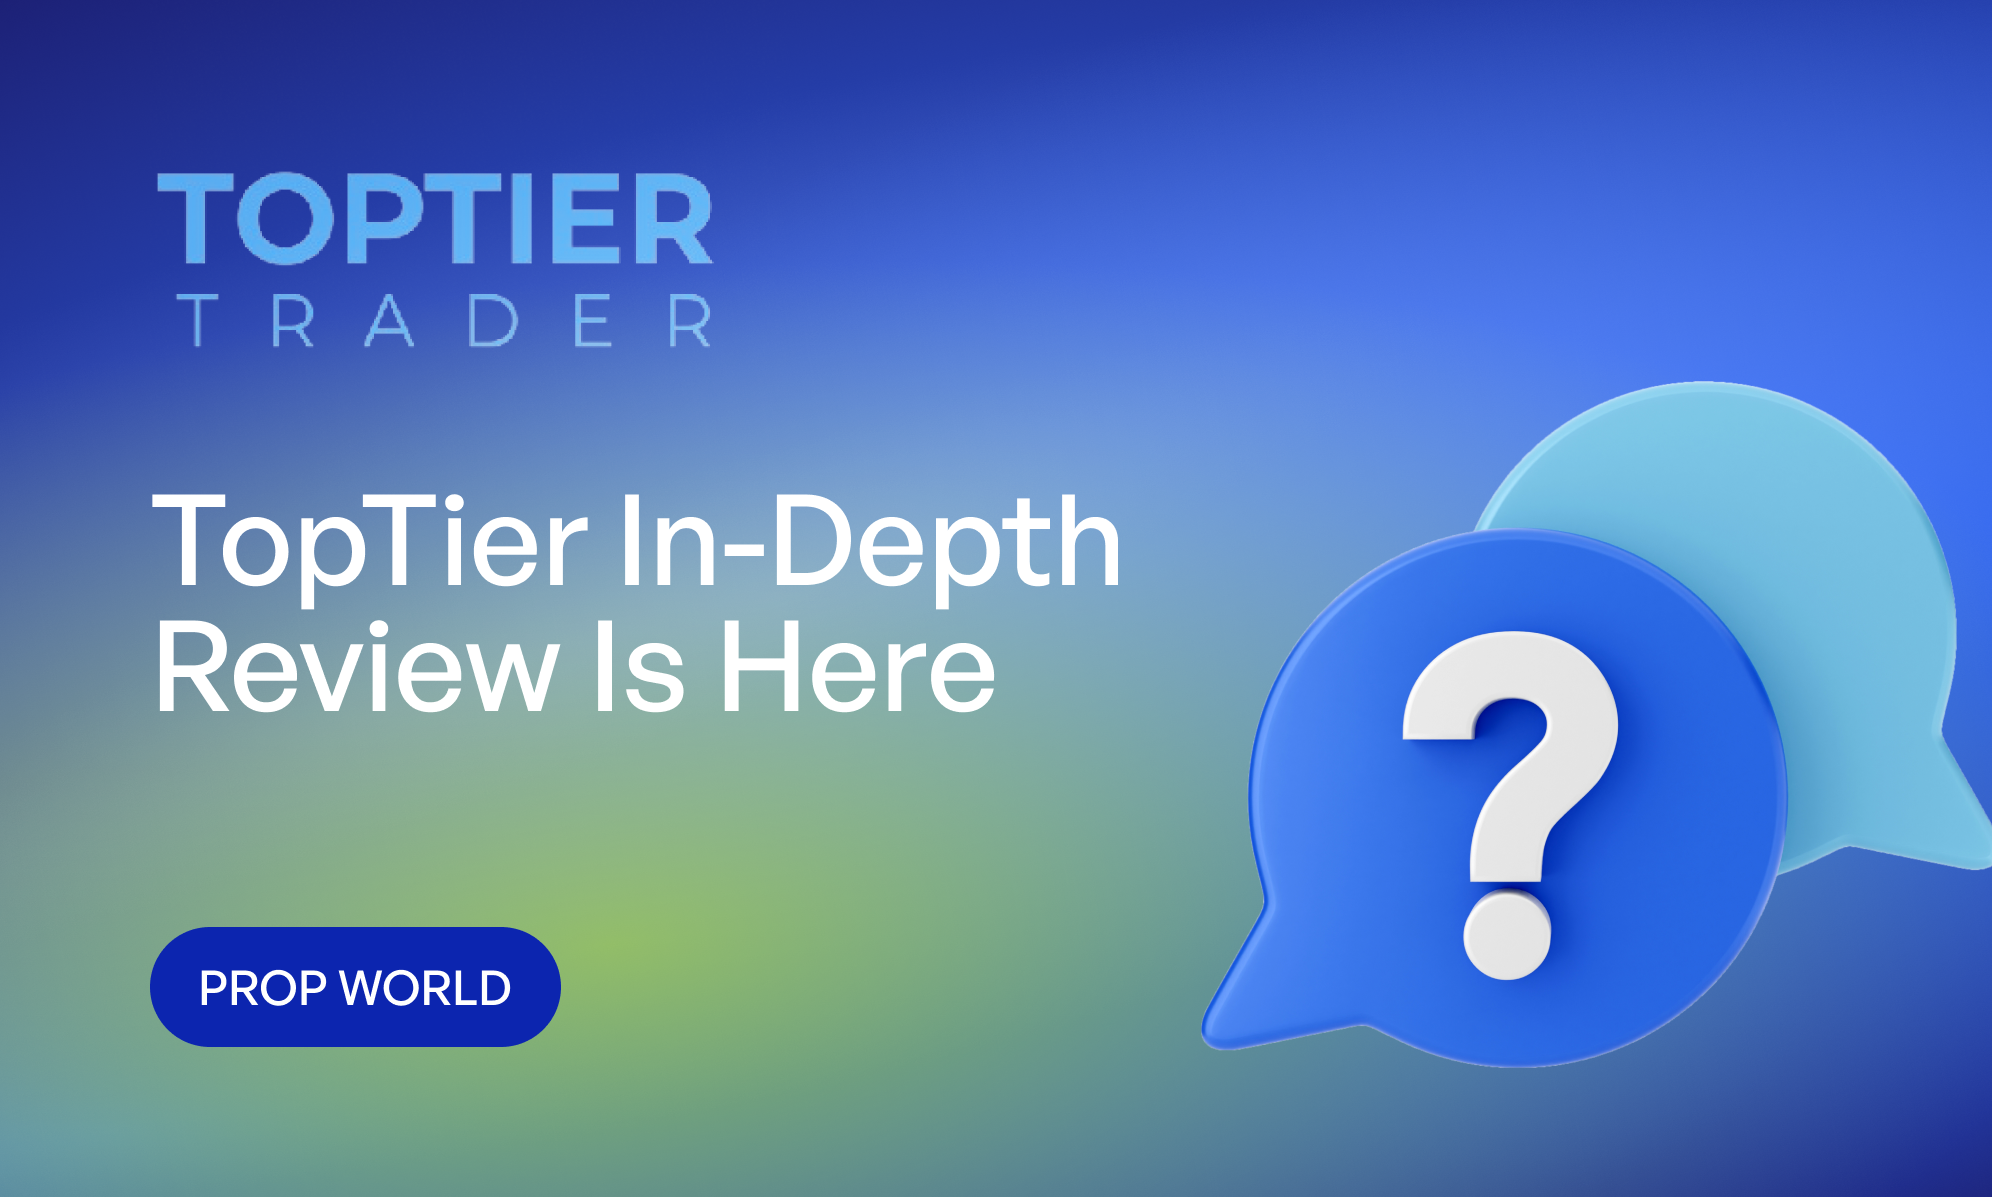 TopTier In-Depth Review Is Here!